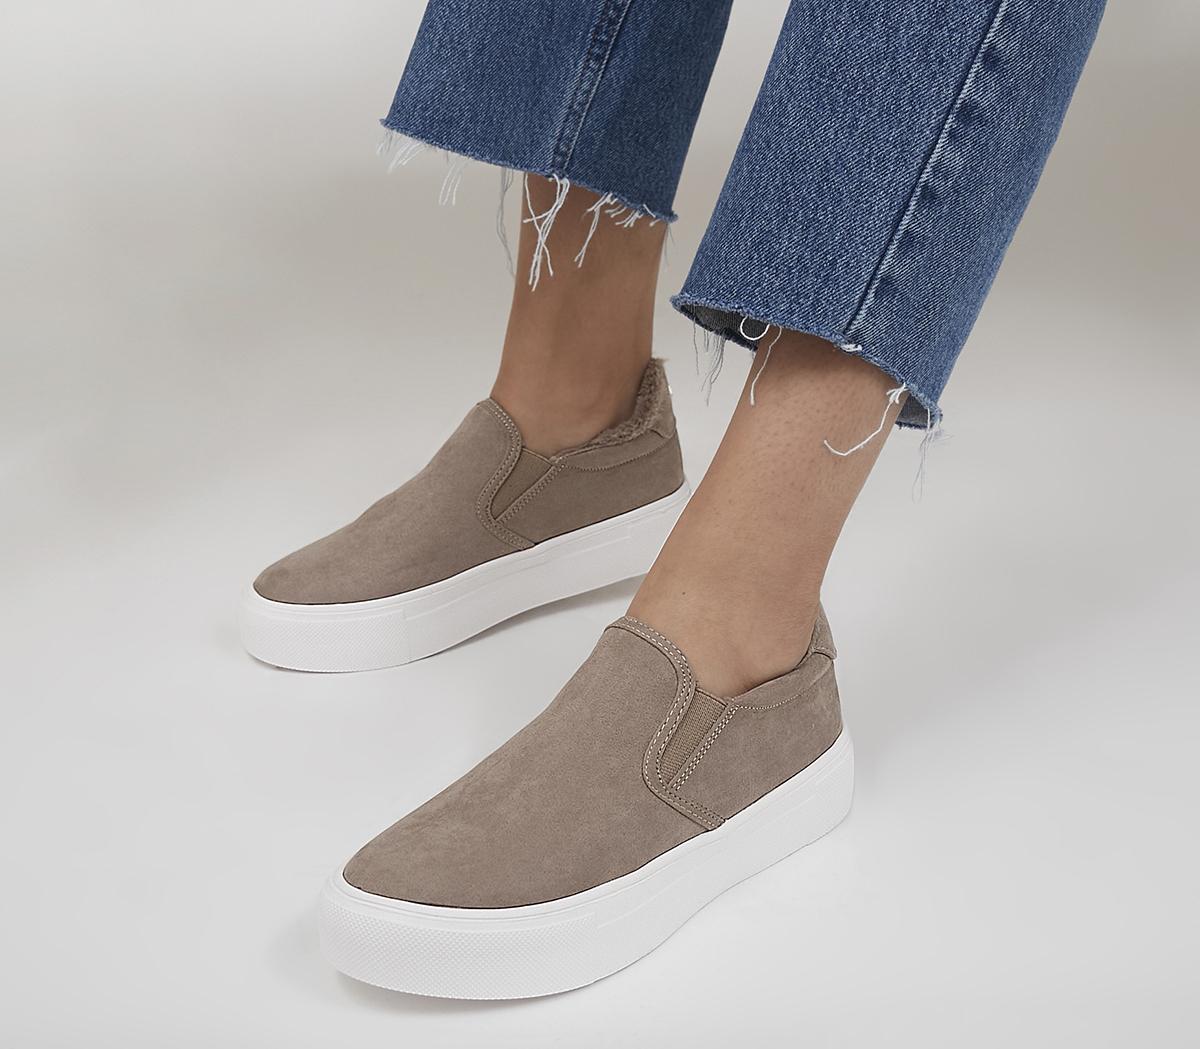 OfficeFade Slip On TrainersTaupe Faux Fur Lined